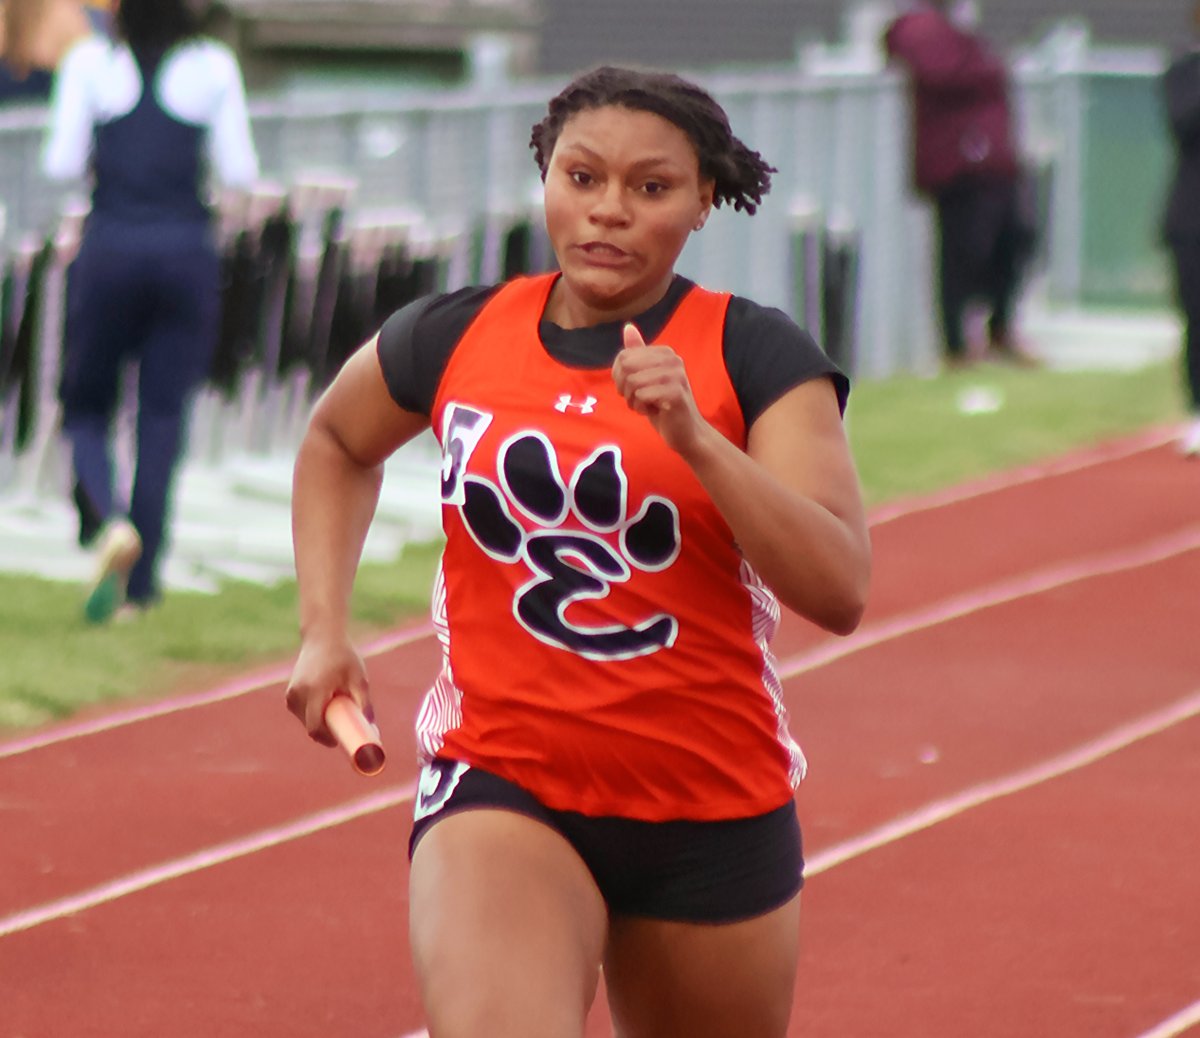 EHS throwers win sprint relay; Joi Story the top discus mark in 3A @GirlsEHStrack theintelligencer.com/sports/article…